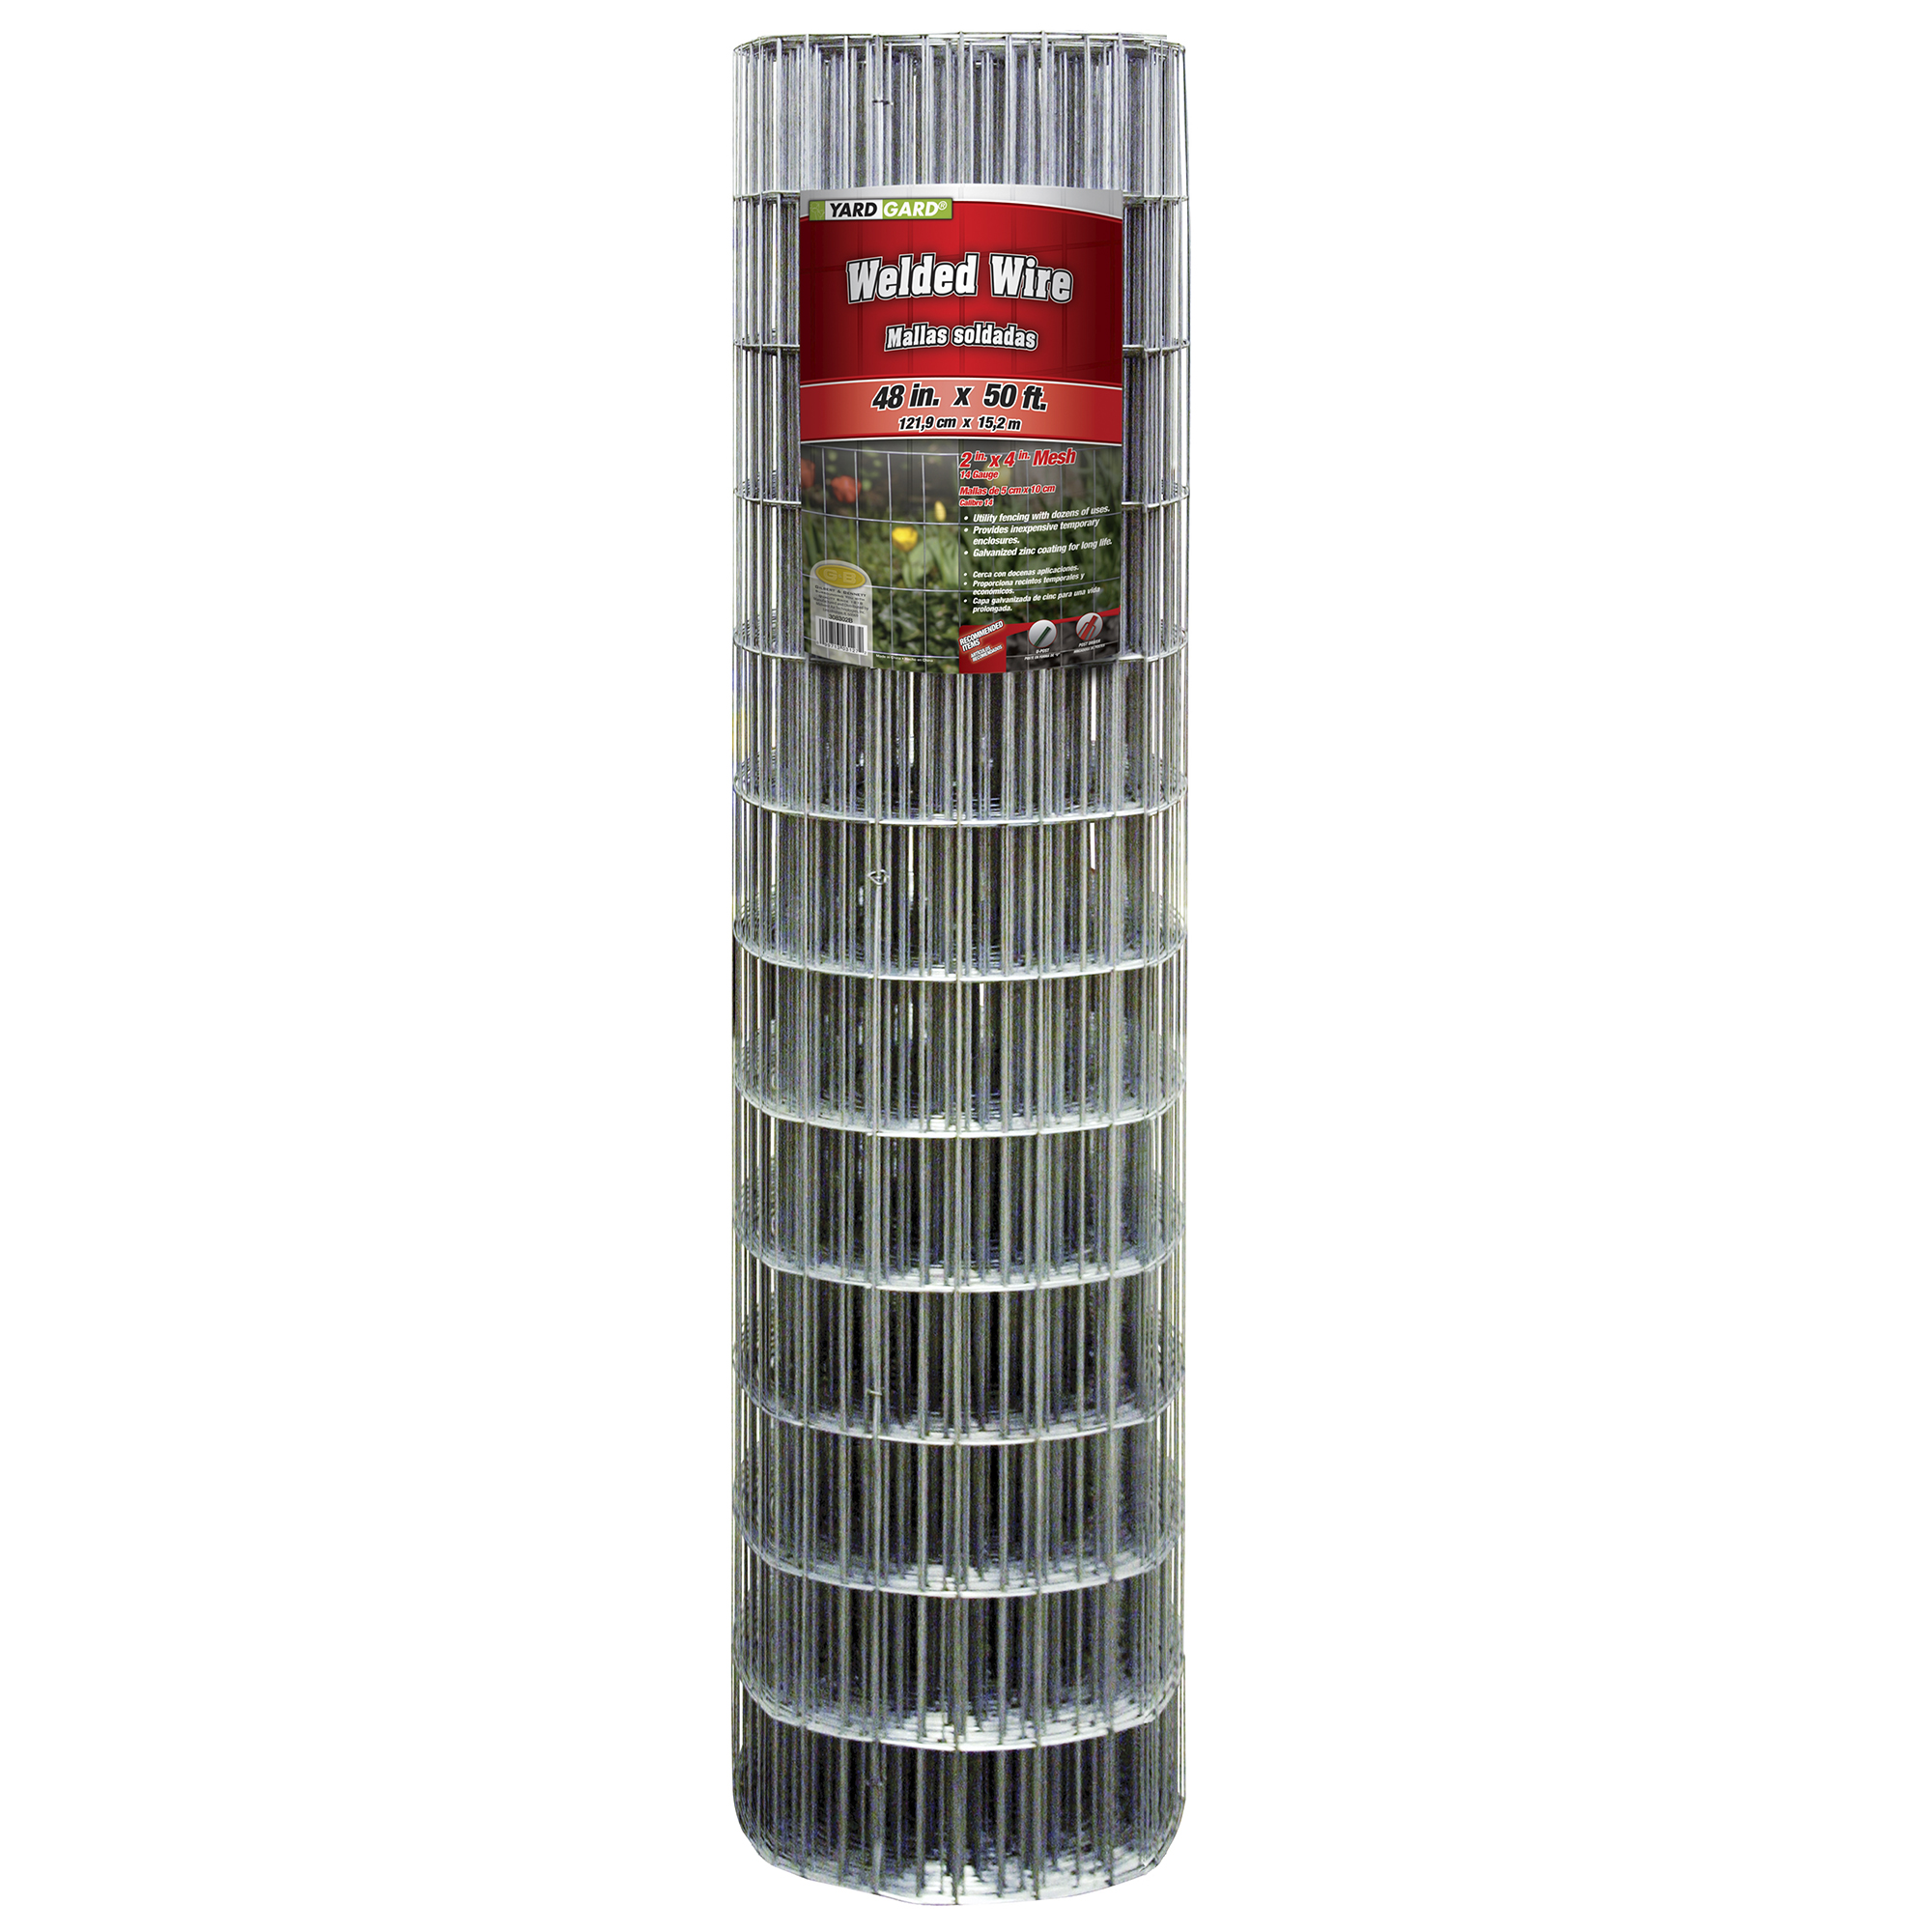 YARDGARD 2 Inch By 4 Inch Mesh, 48 Inch by 50 Foot Galvanized Welded Wire Fence - image 1 of 4